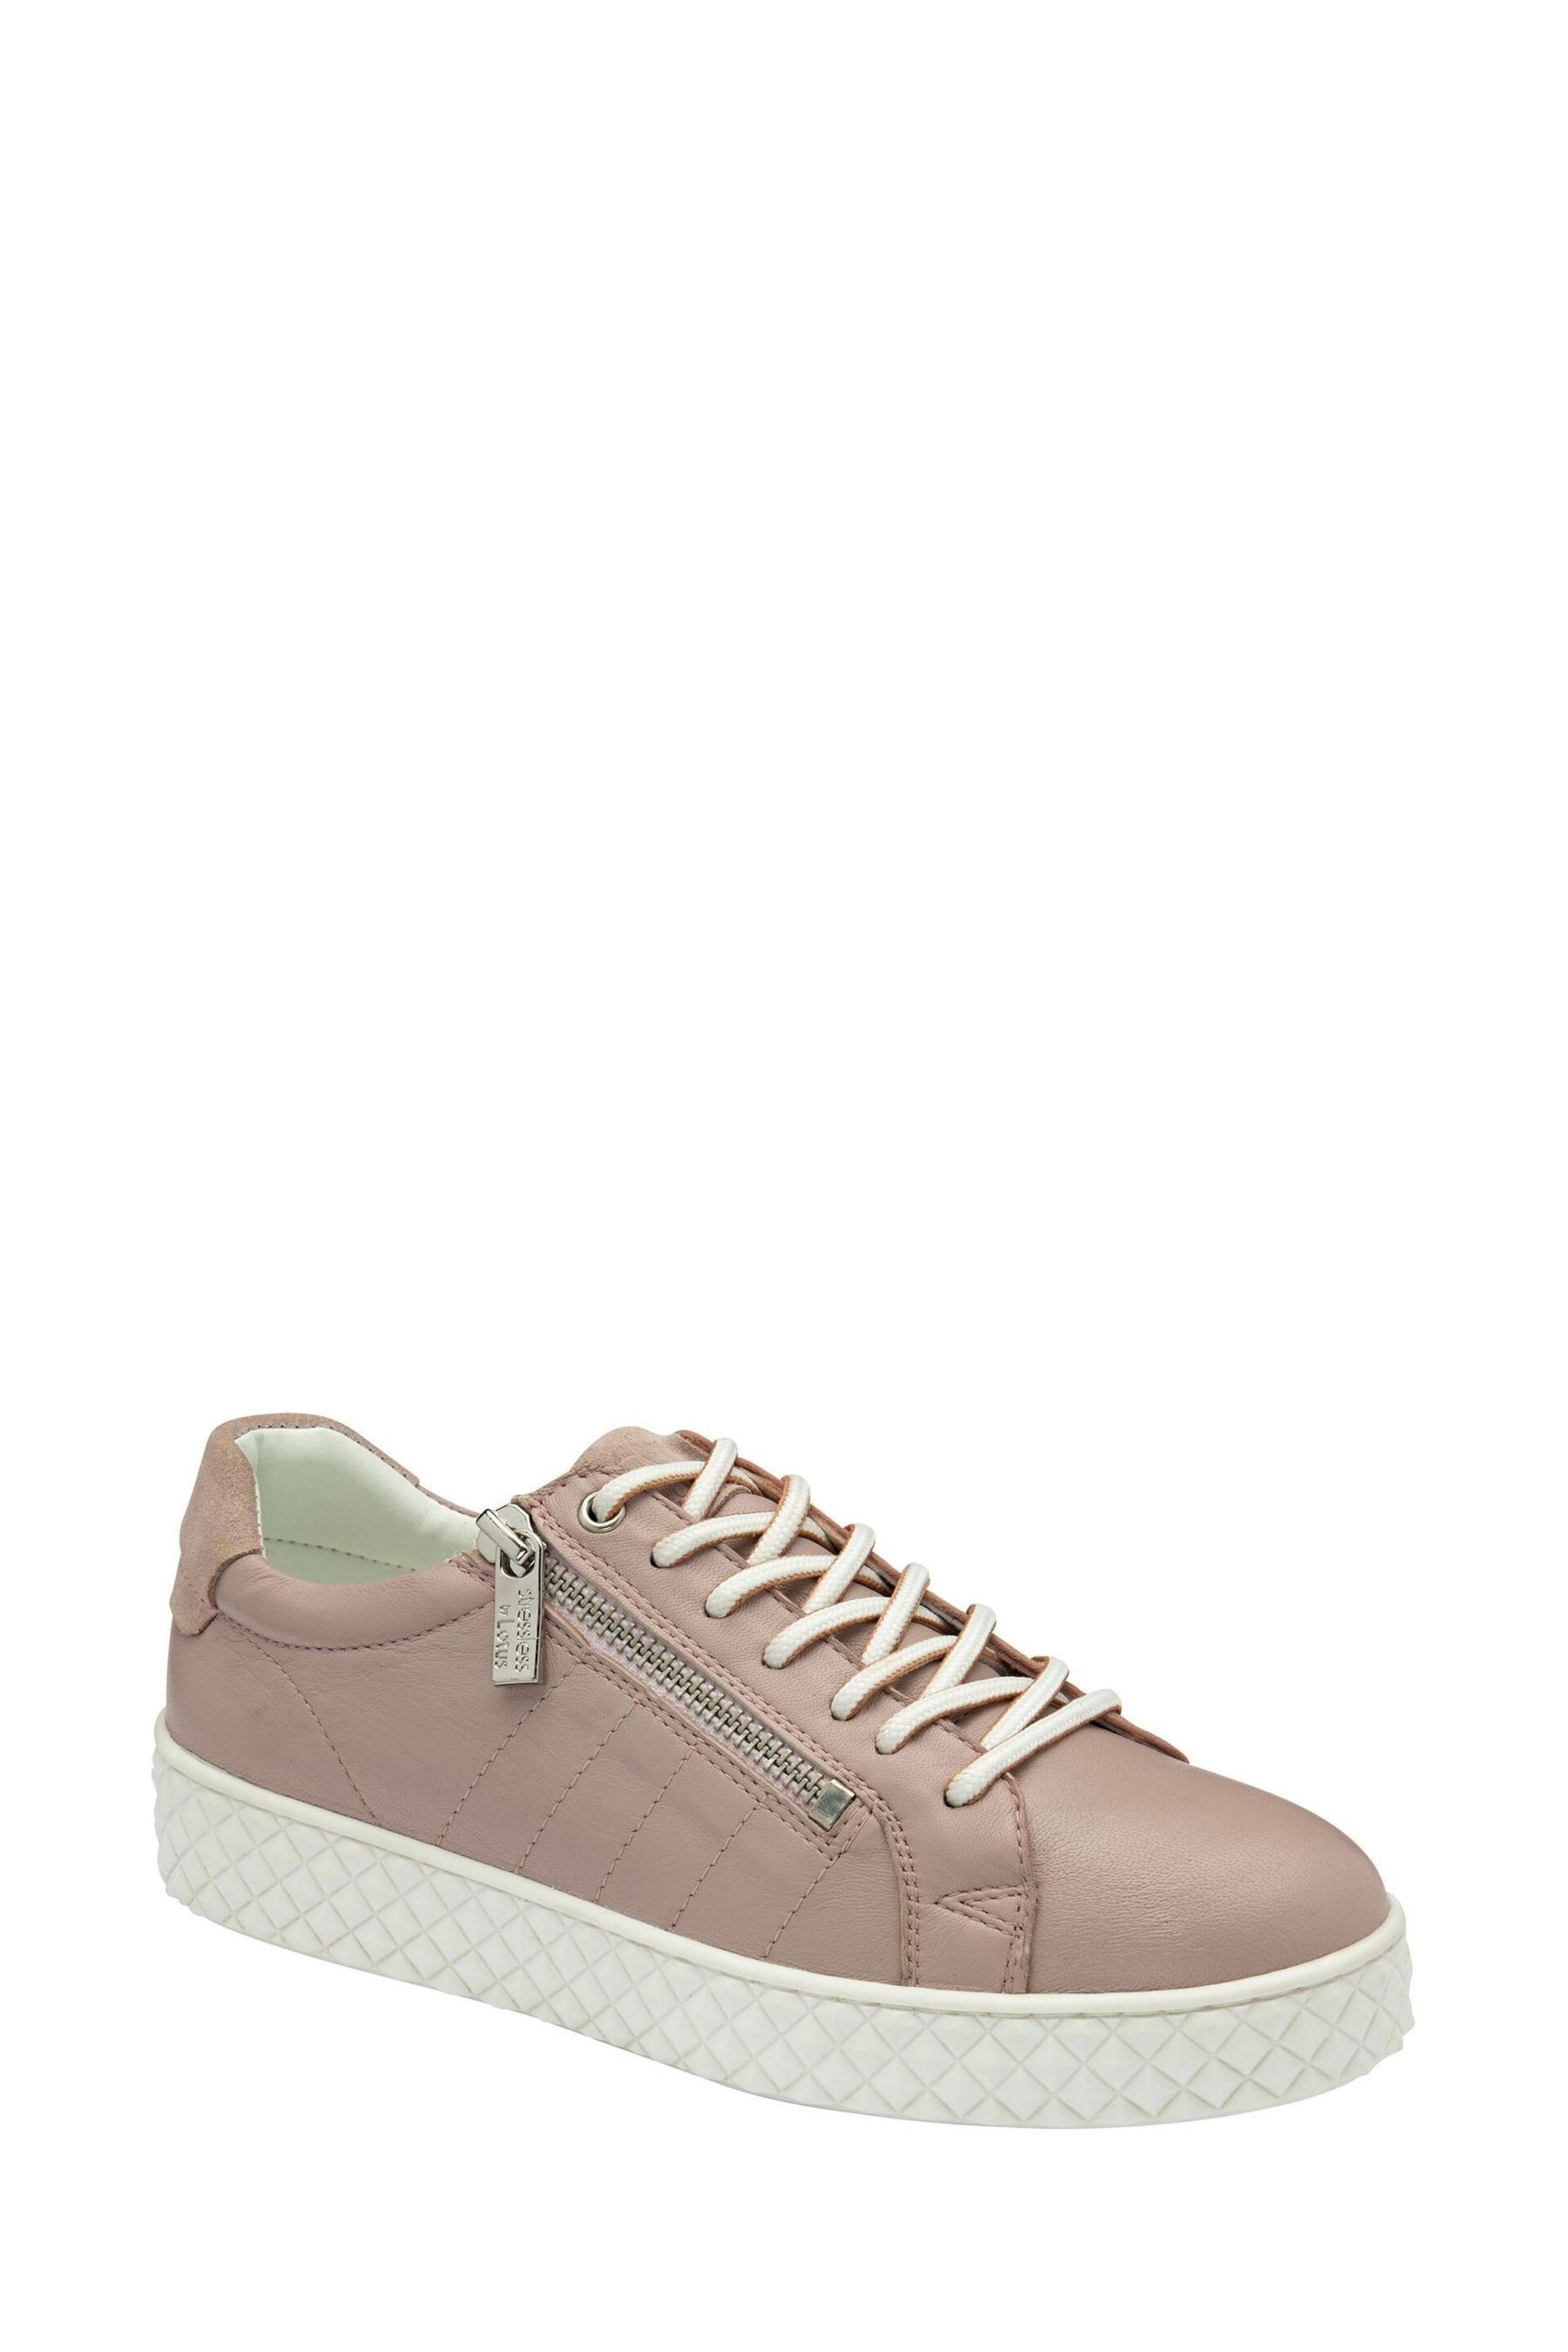 Lotus Pink Leather Zip-Up Trainers - Image 1 of 3